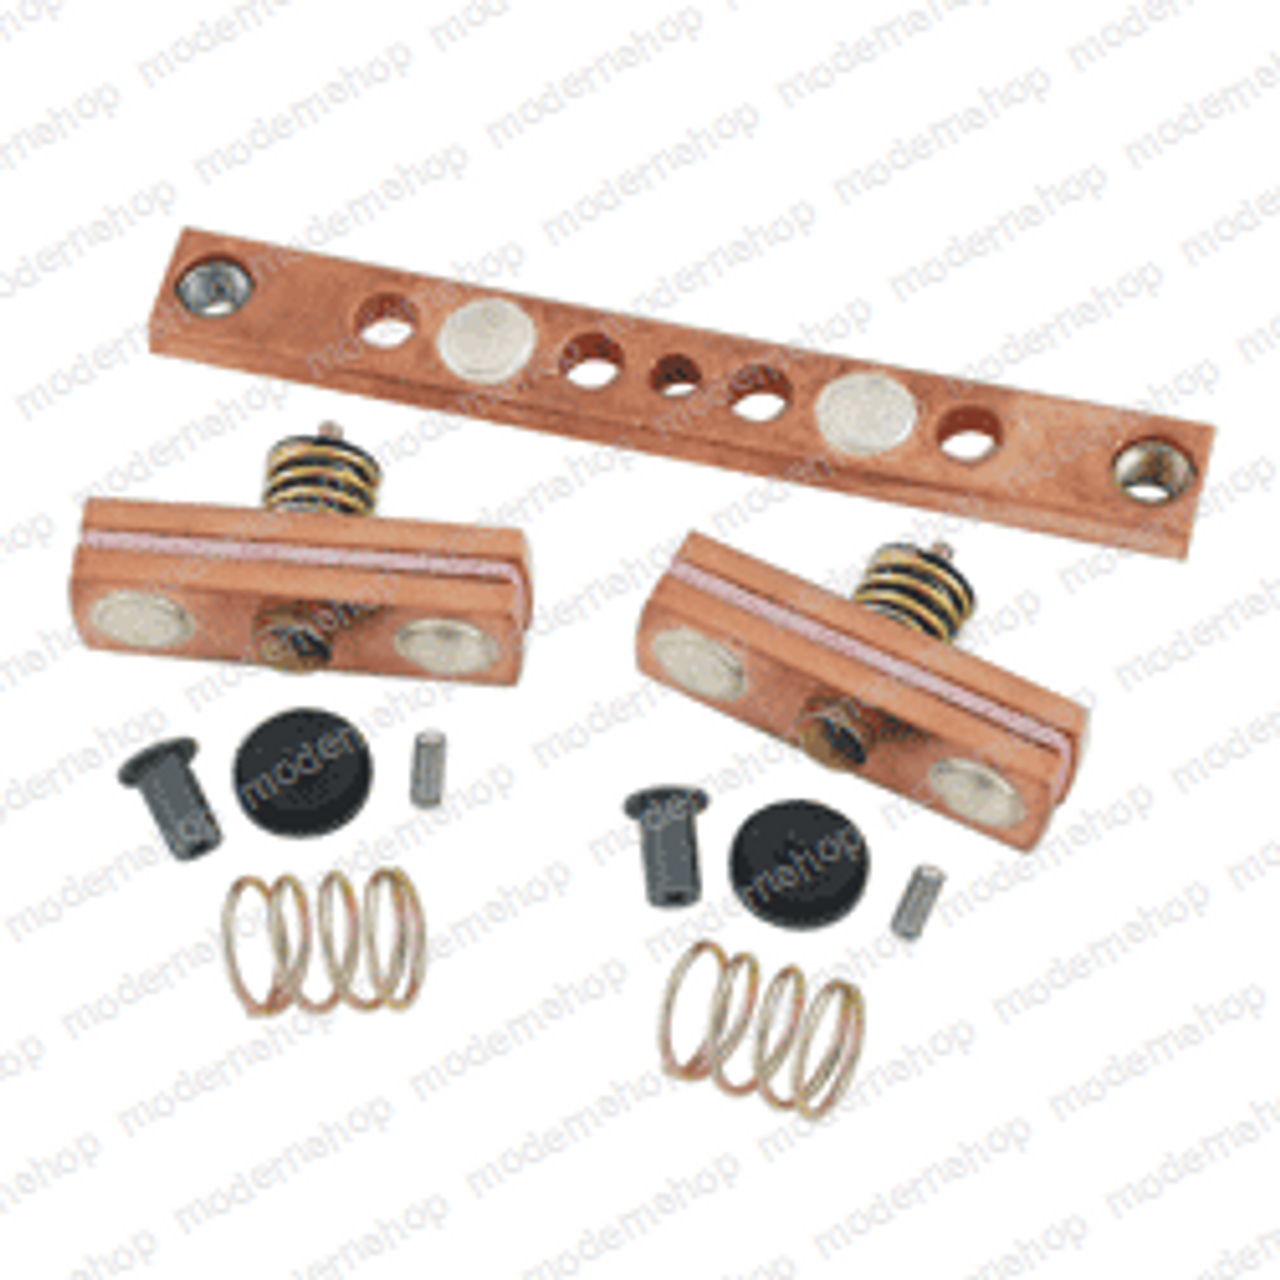 118941: Crown Forklift CONTACT KIT